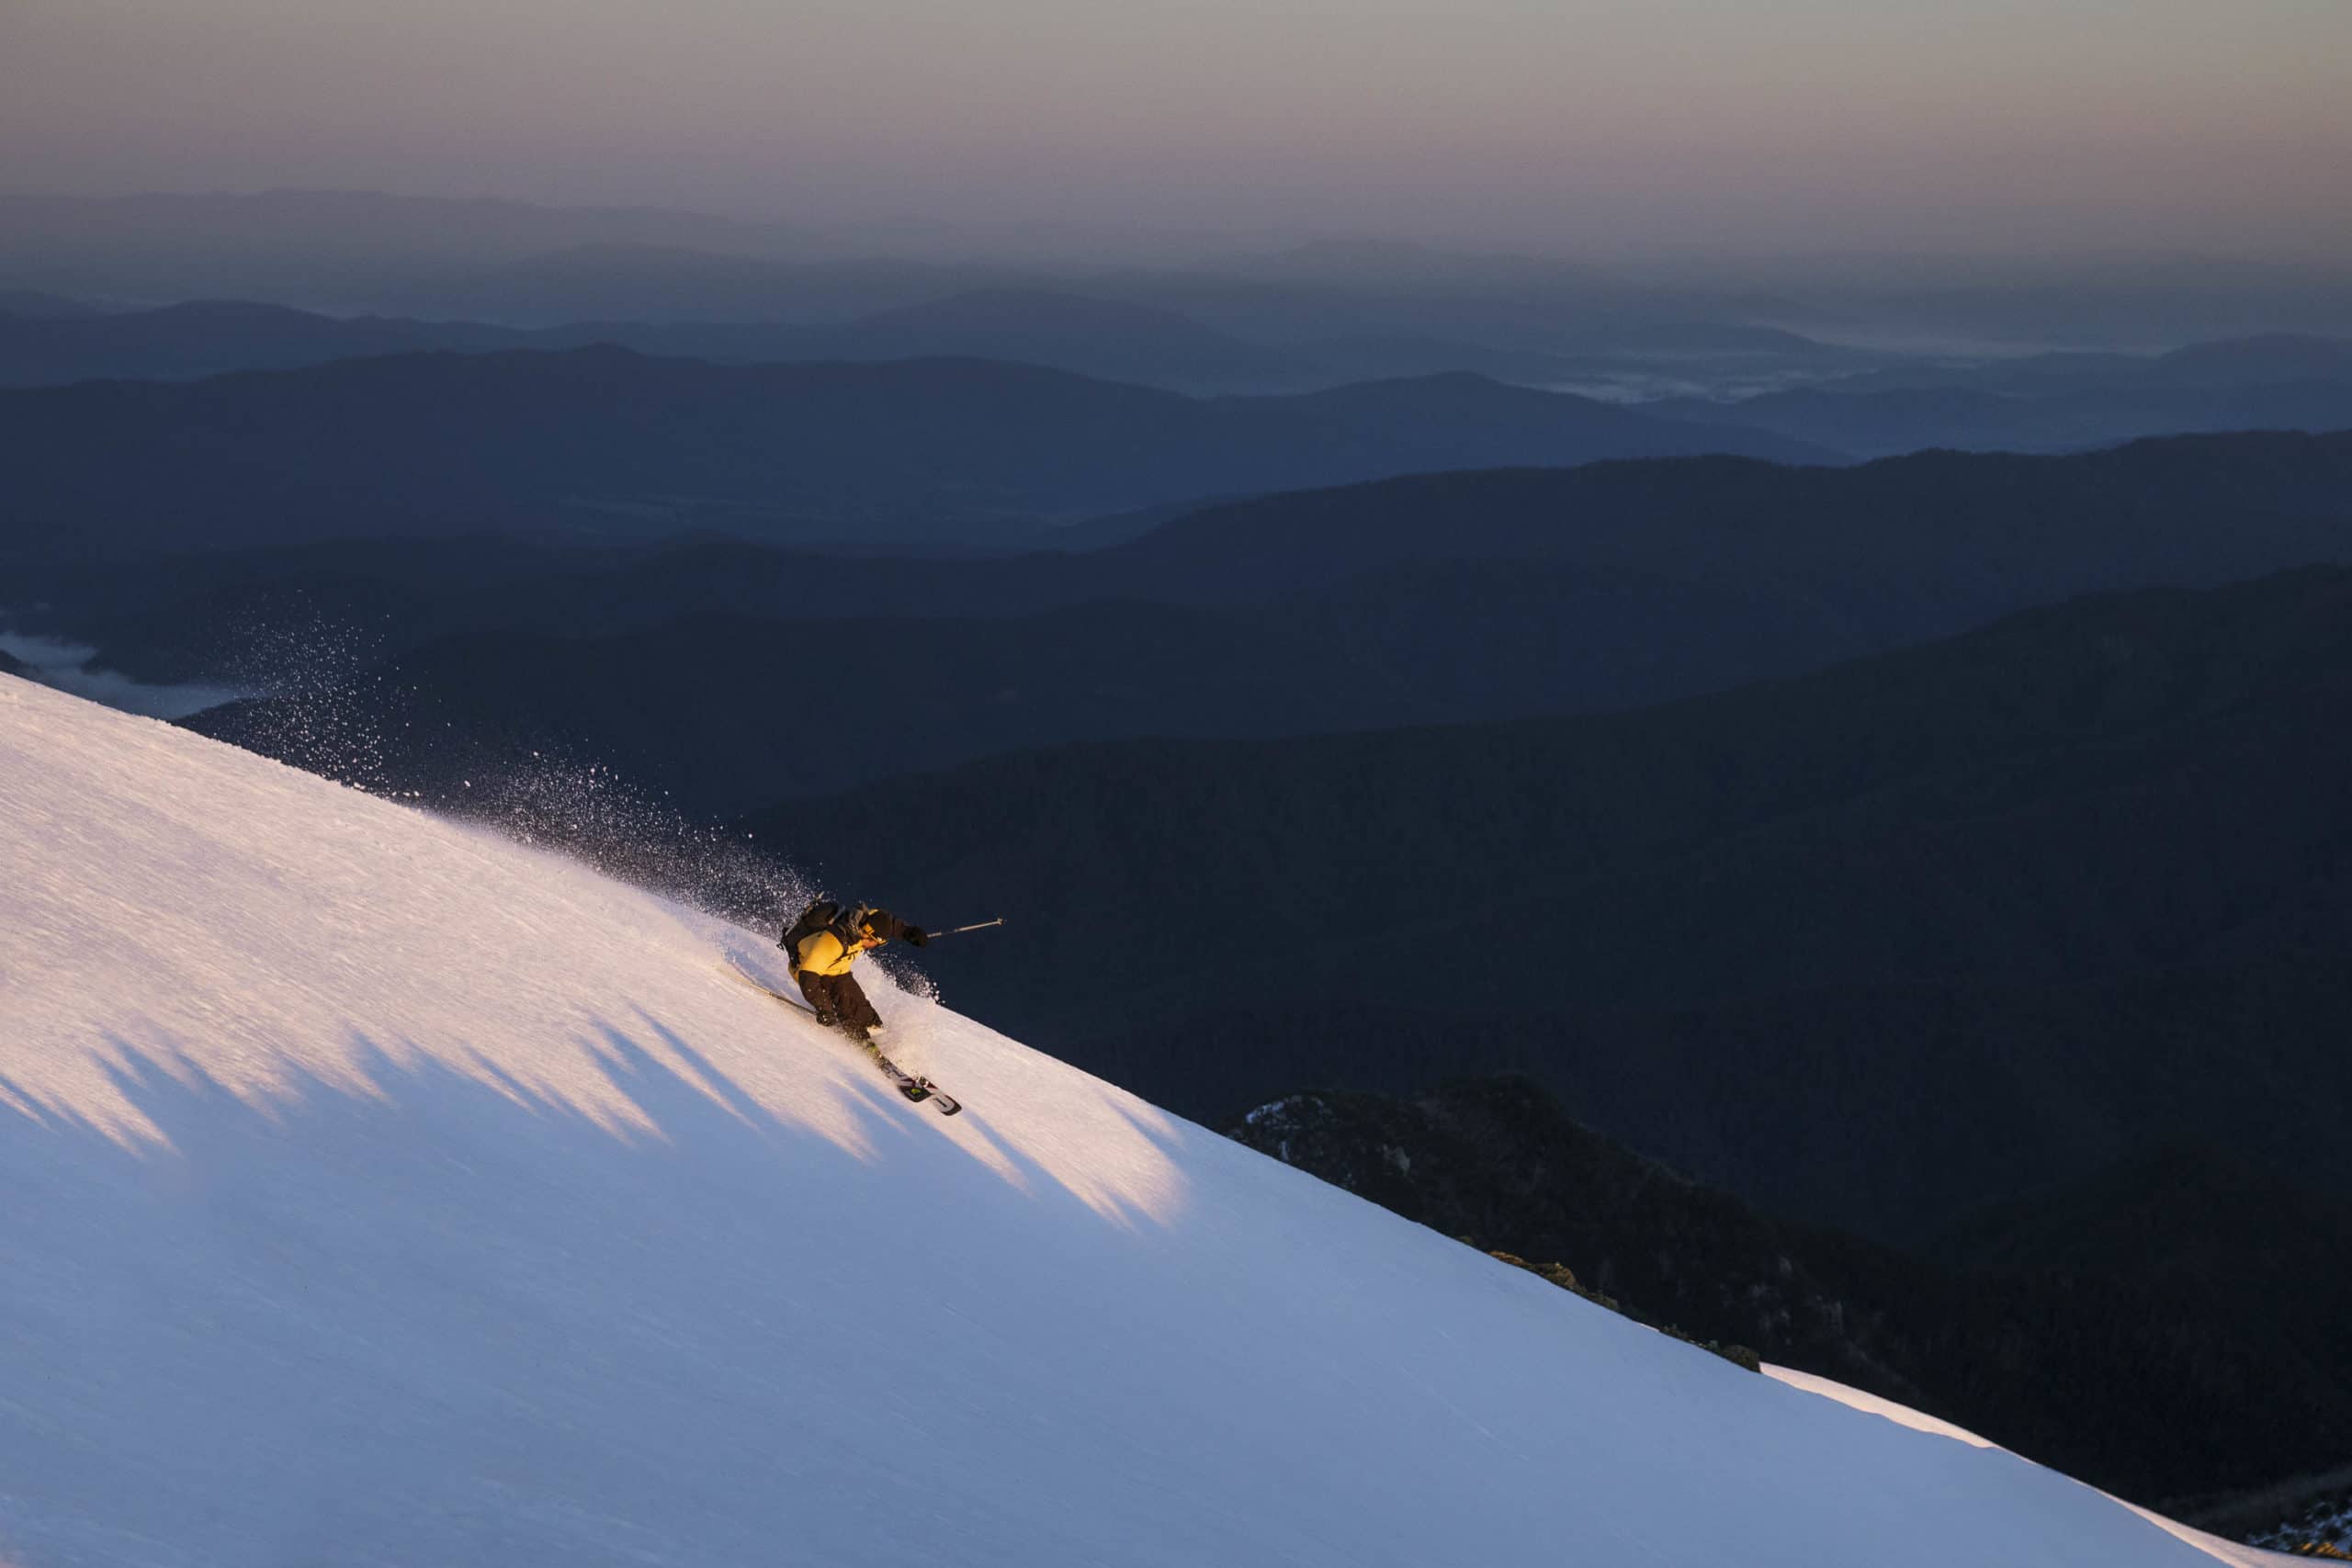 The North Face Ski Film &#8216;Western Faces&#8217; Proves How Epic Aussie Mountains Really Are